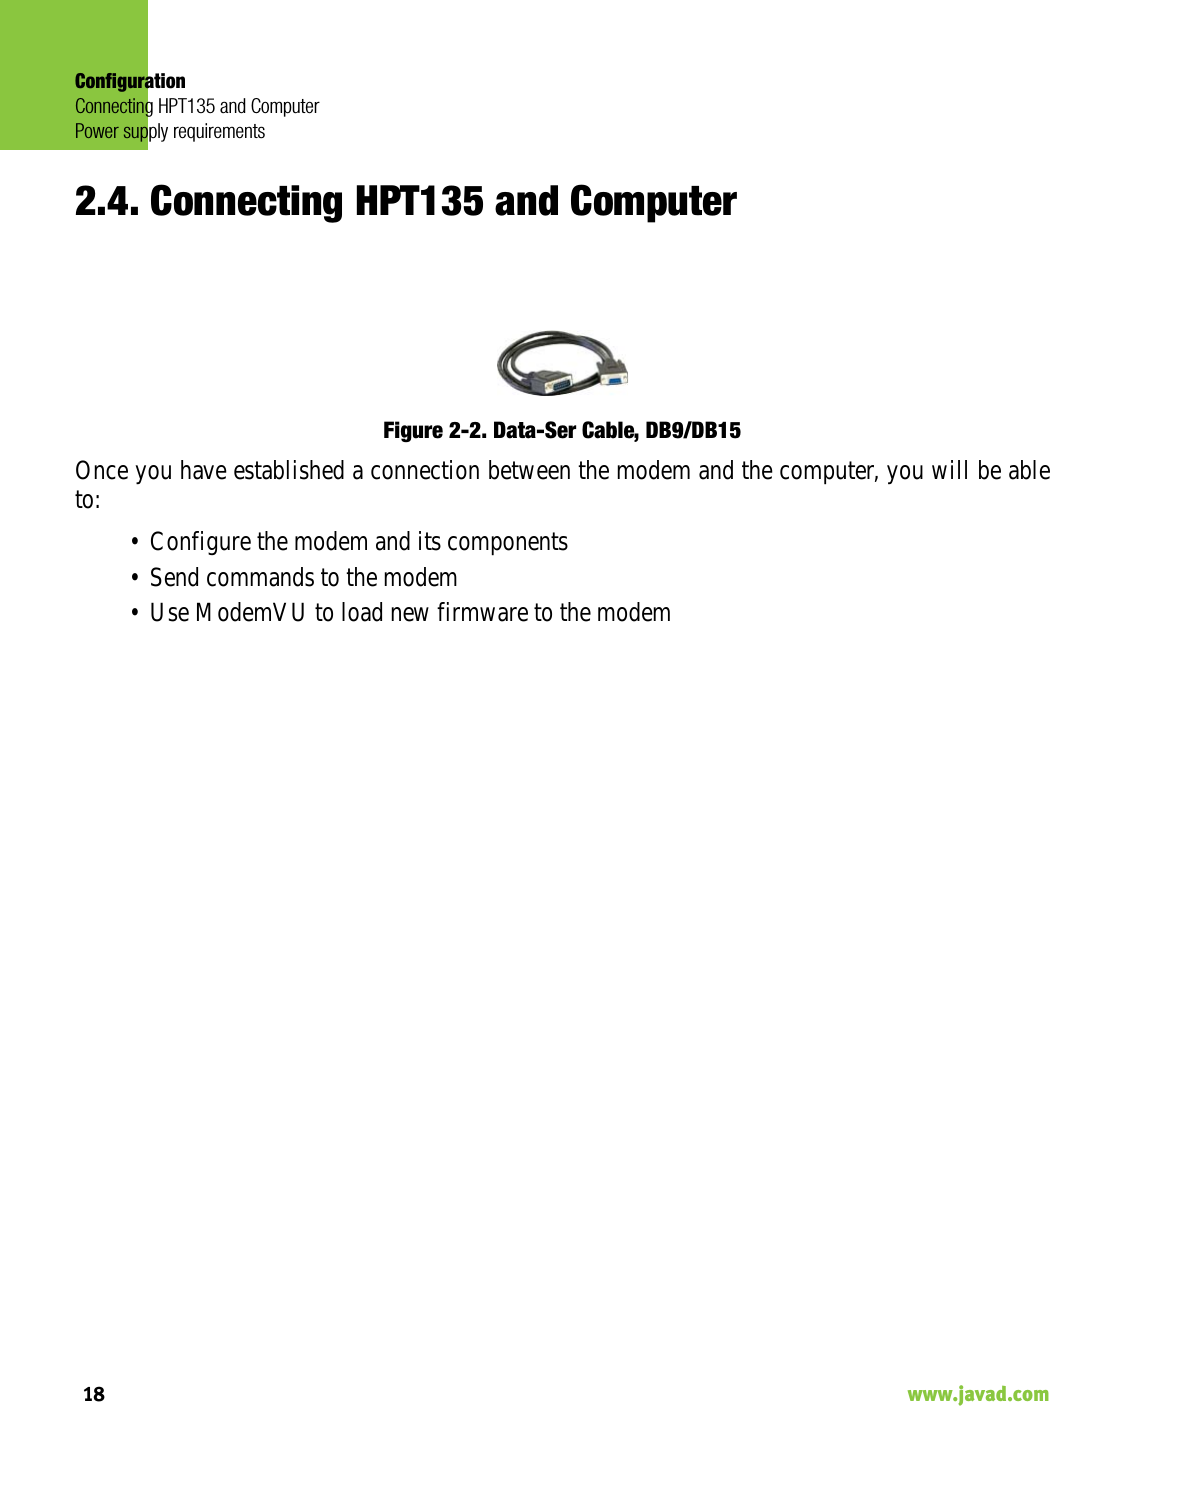 ConfigurationConnecting HPT135 and ComputerPower supply requirements18                                                                                                                     www.javad.com2.4. Connecting HPT135 and ComputerFigure 2-2. Data-Ser Cable, DB9/DB15 Once you have established a connection between the modem and the computer, you will be ableto: • Configure the modem and its components• Send commands to the modem• Use ModemVU to load new firmware to the modem